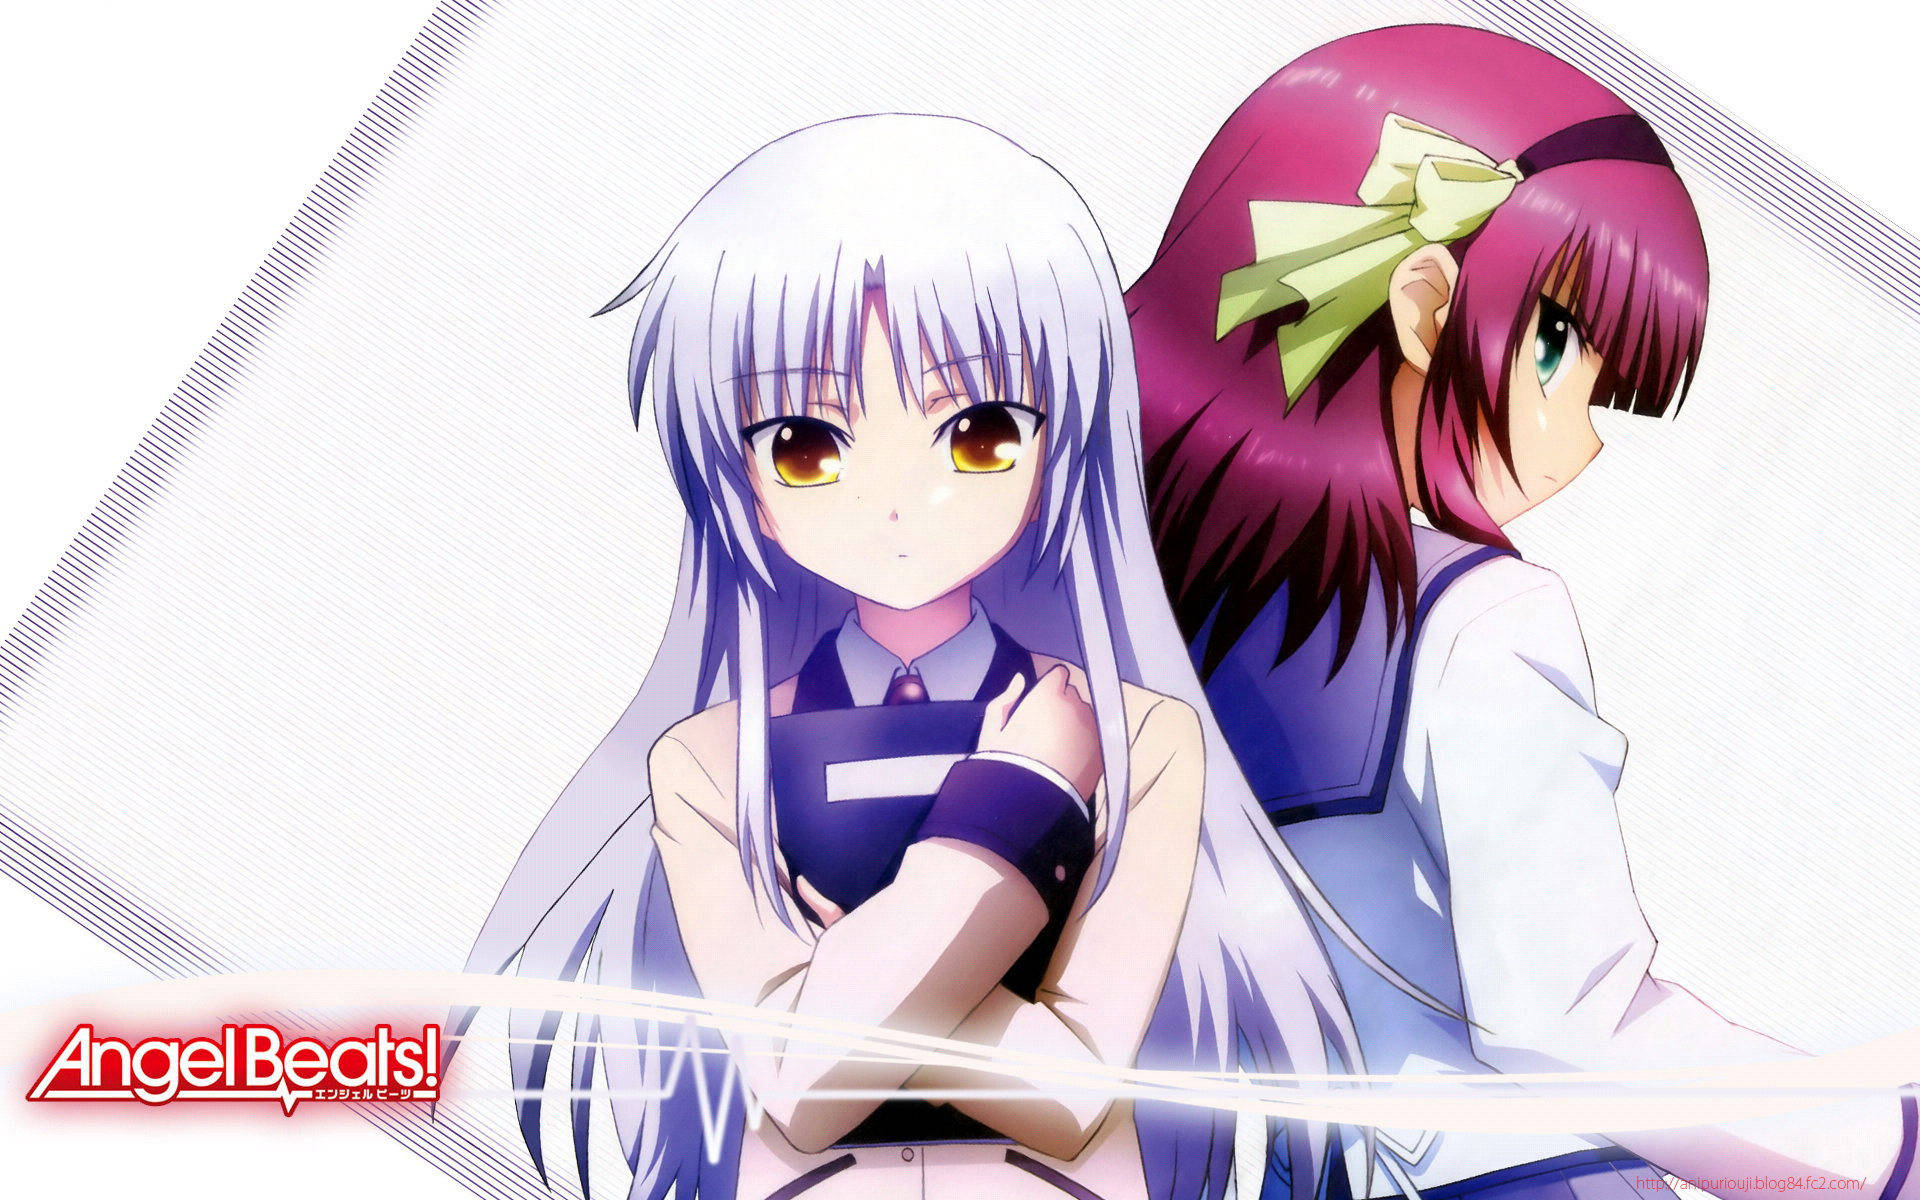 10 Things You Didn't Know about Angel Beats!